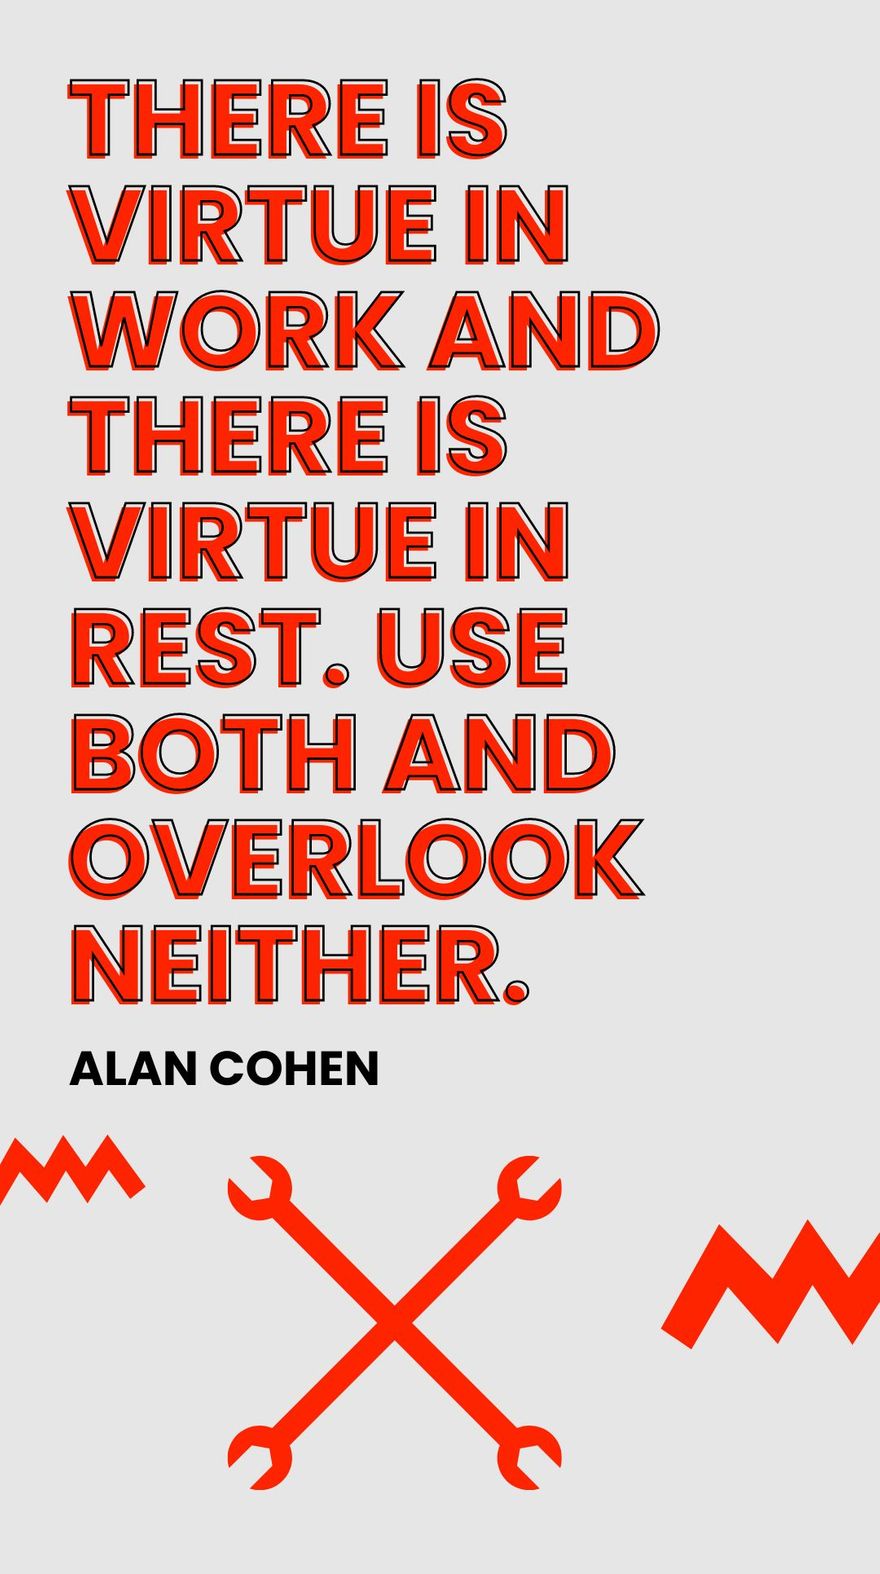 Alan Cohen - There is virtue in work and there is virtue in rest. Use both and overlook neither.